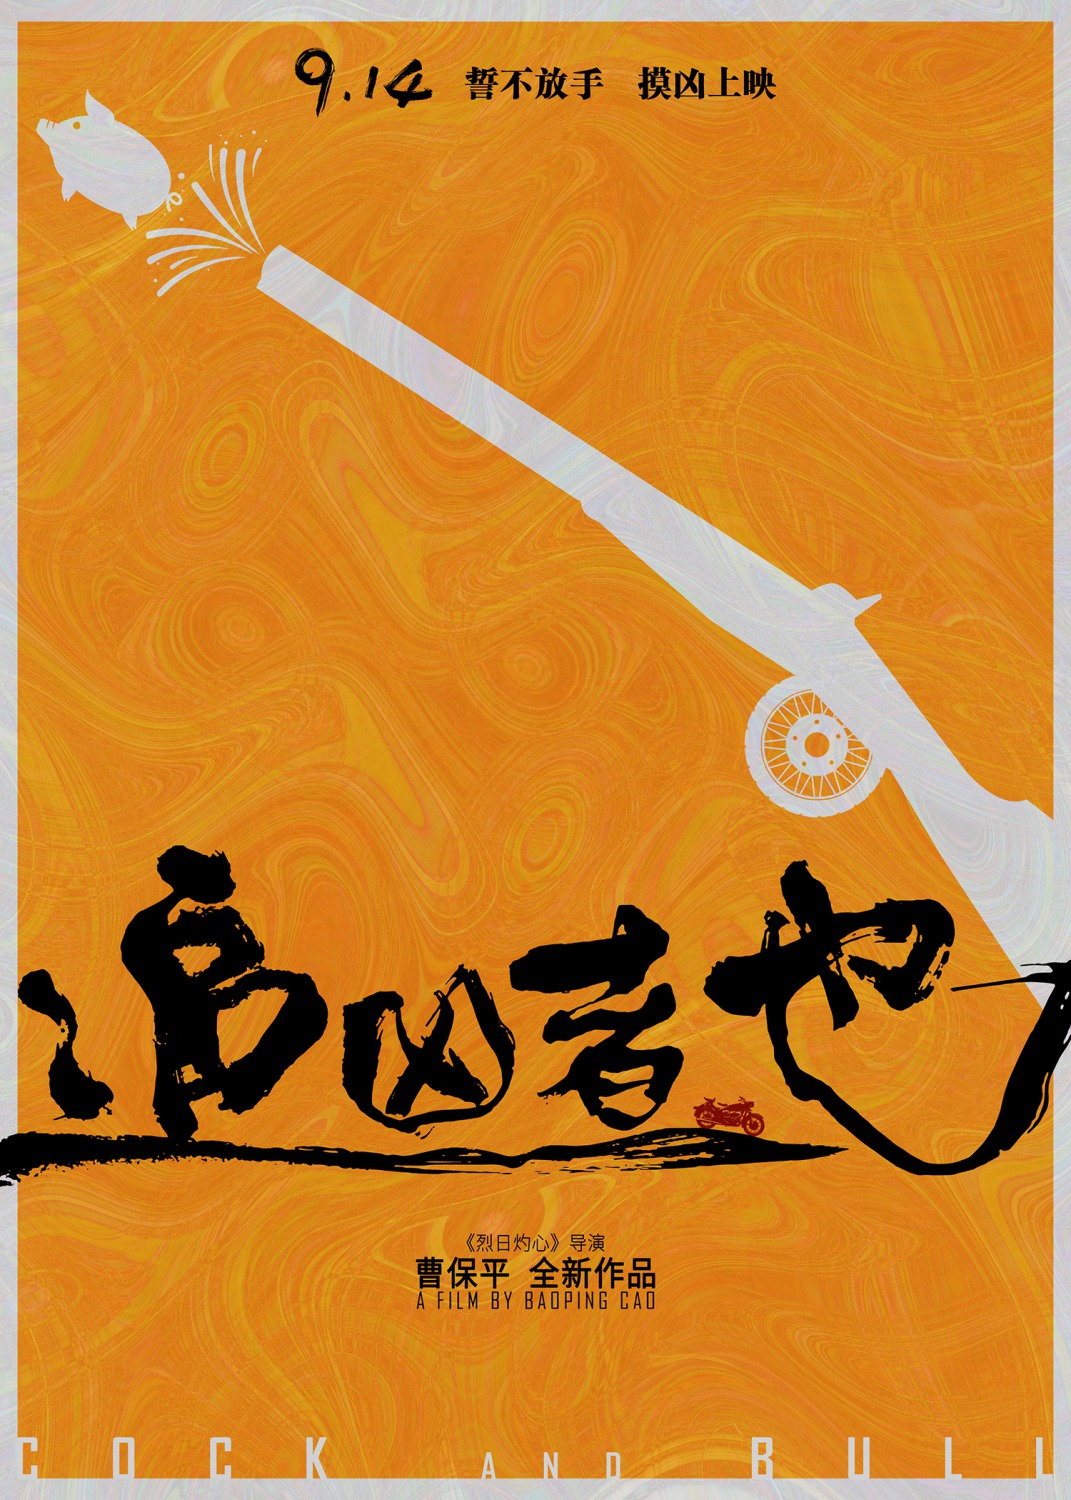 Extra Large Movie Poster Image for Zhui xiong zhe ye (#1 of 16)